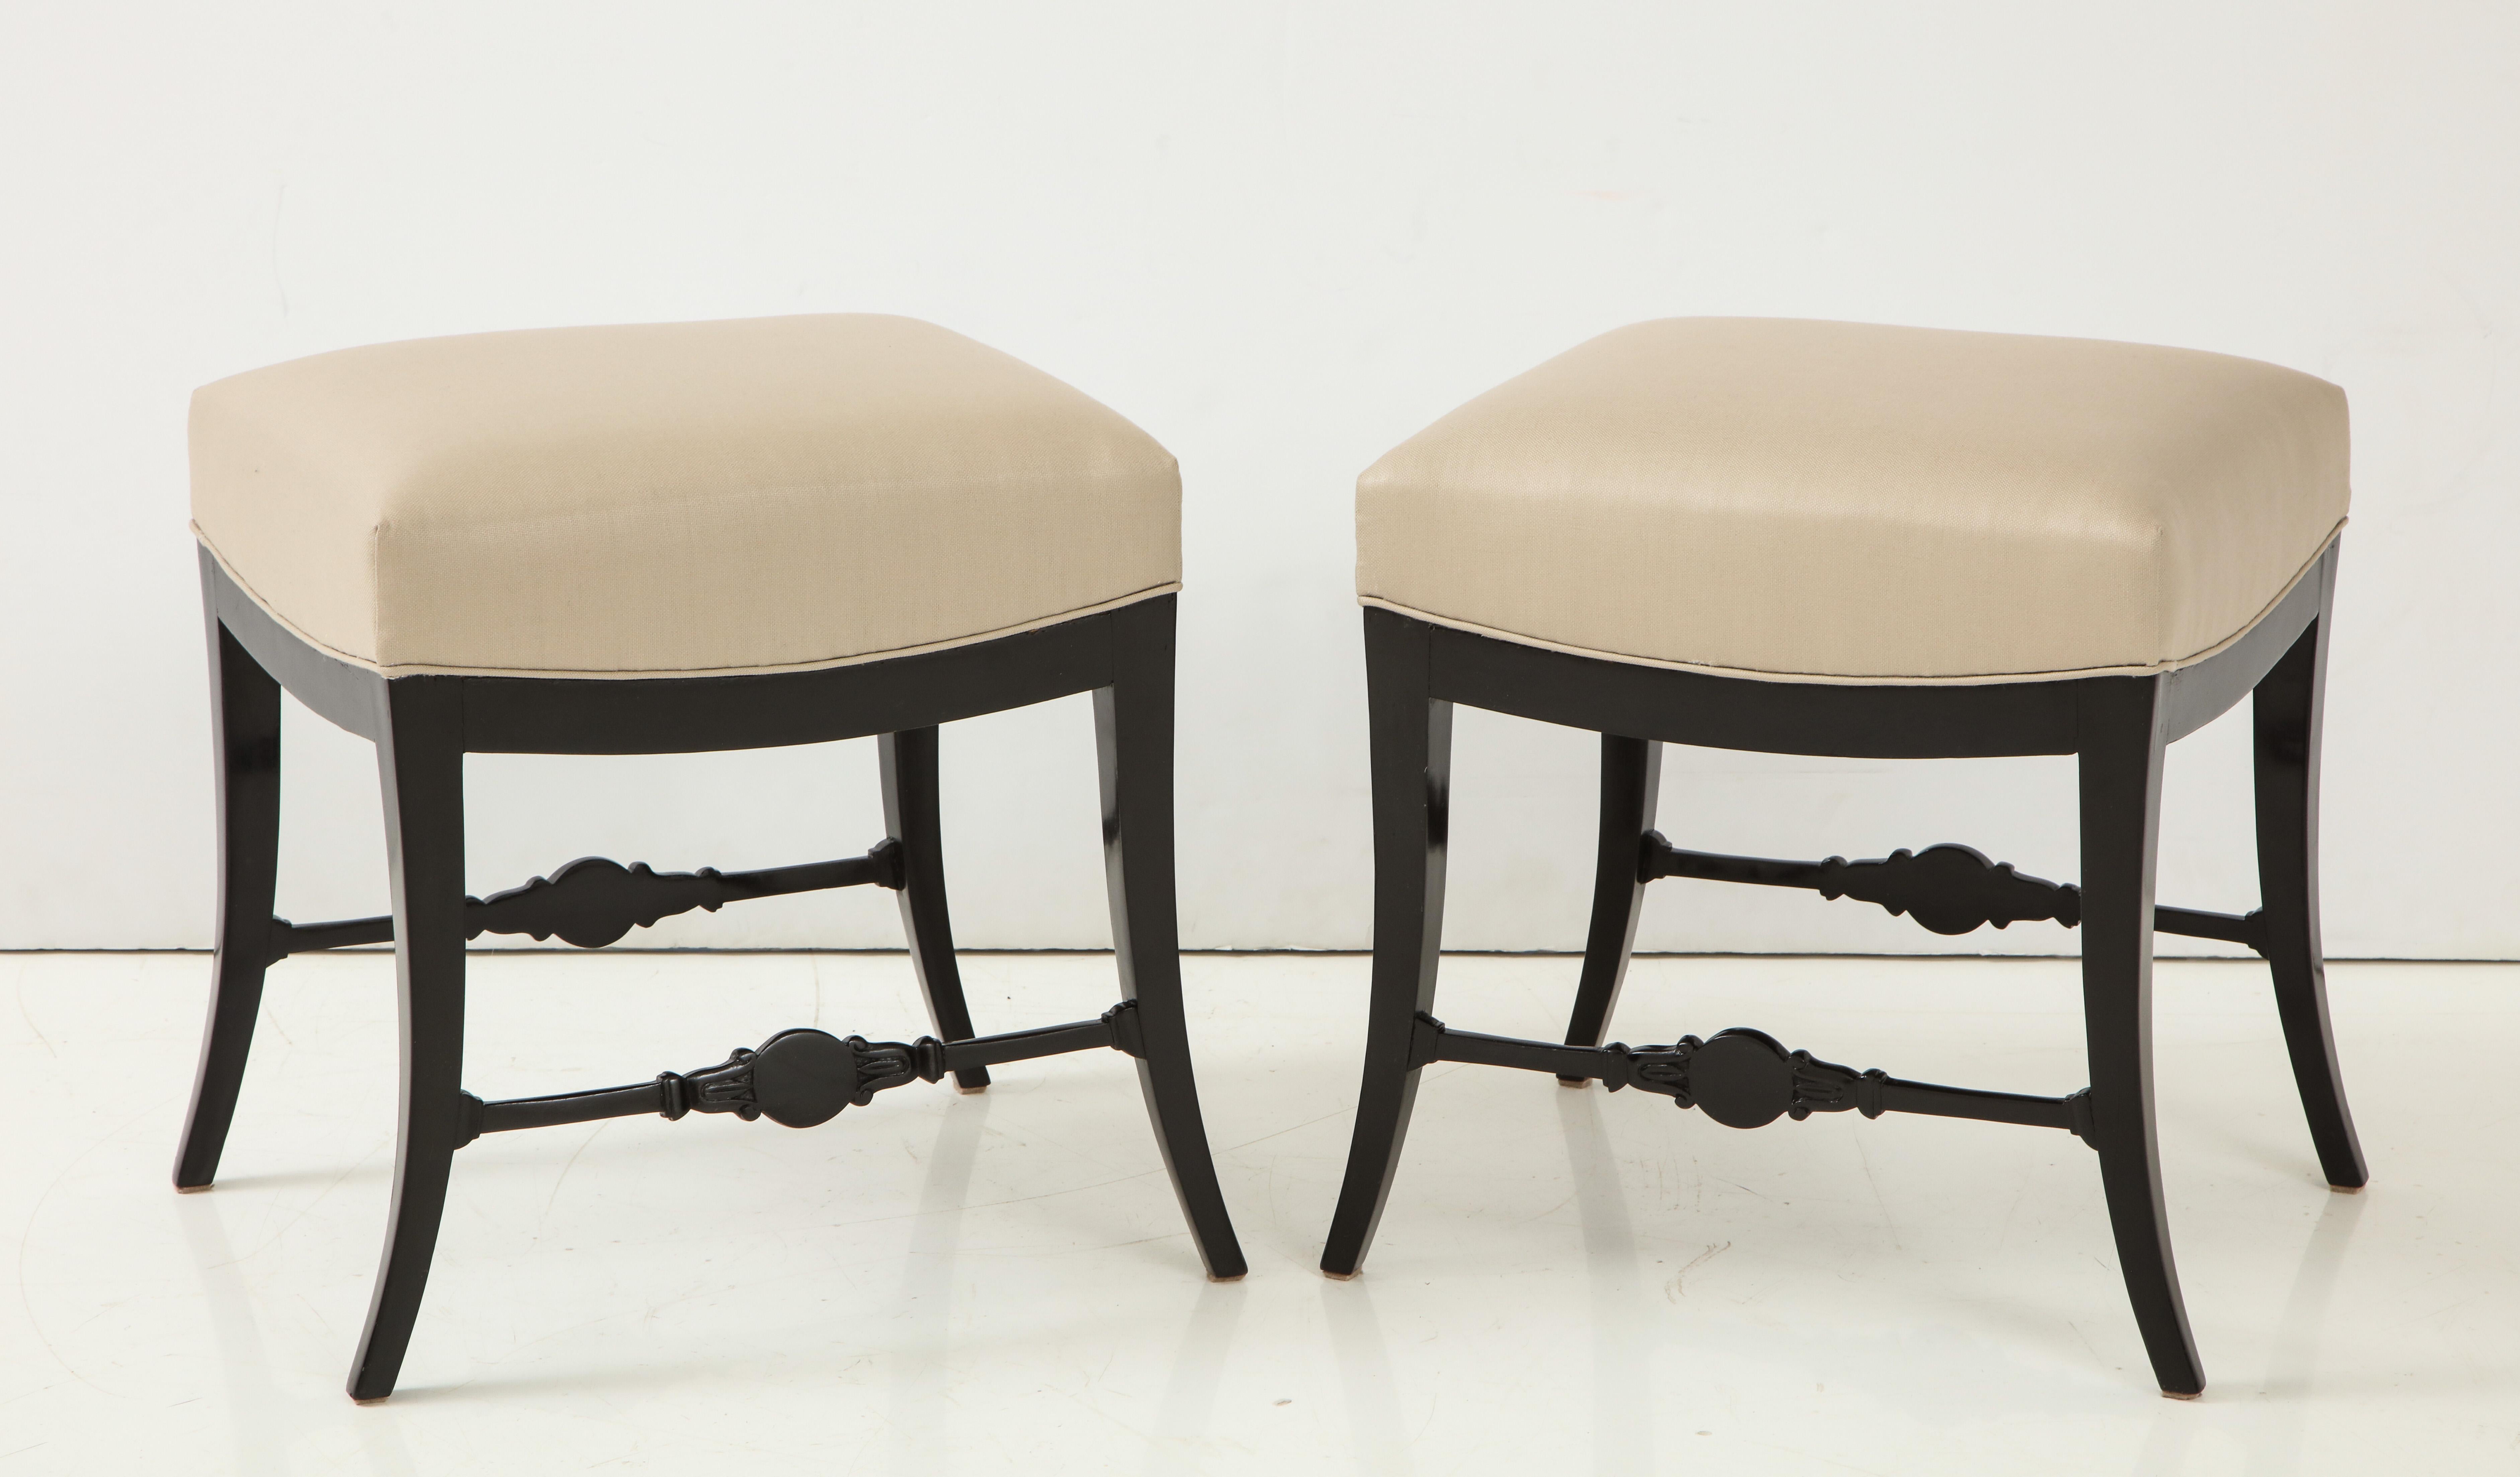 A pair of Swedish neoclassical ebonized and upholstered stools, circa 1830, each with an upholstered seat raised on sabre legs joined by a cross-stretcher with a carved central medallion.